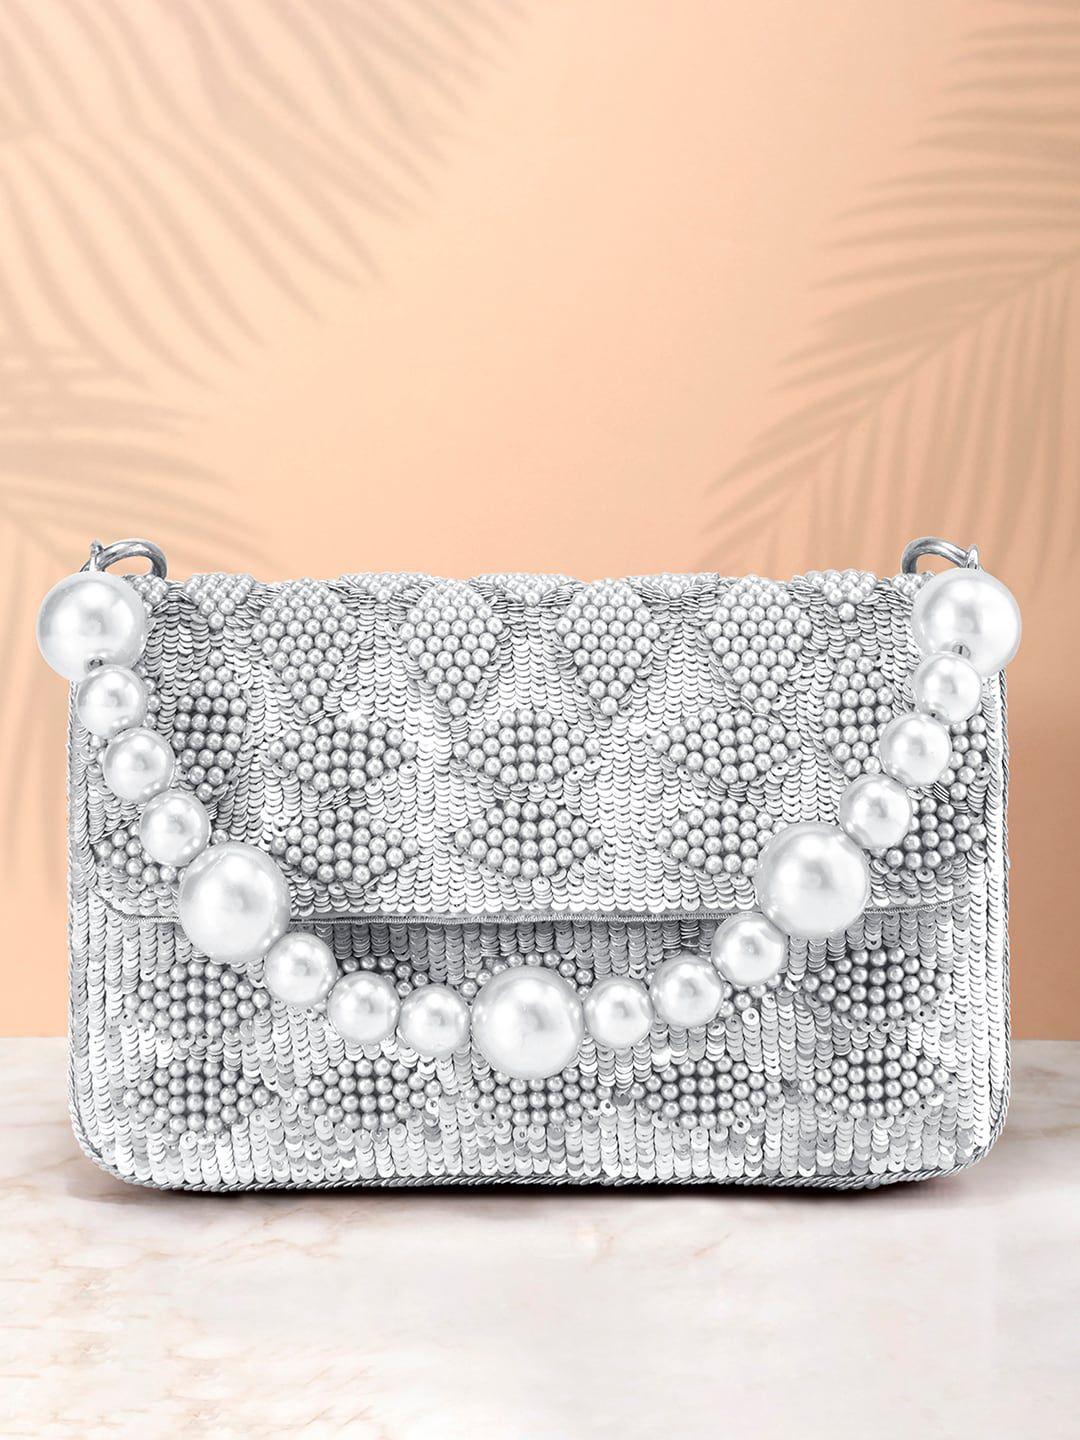 peora silver-toned embellished embroidered purse clutch